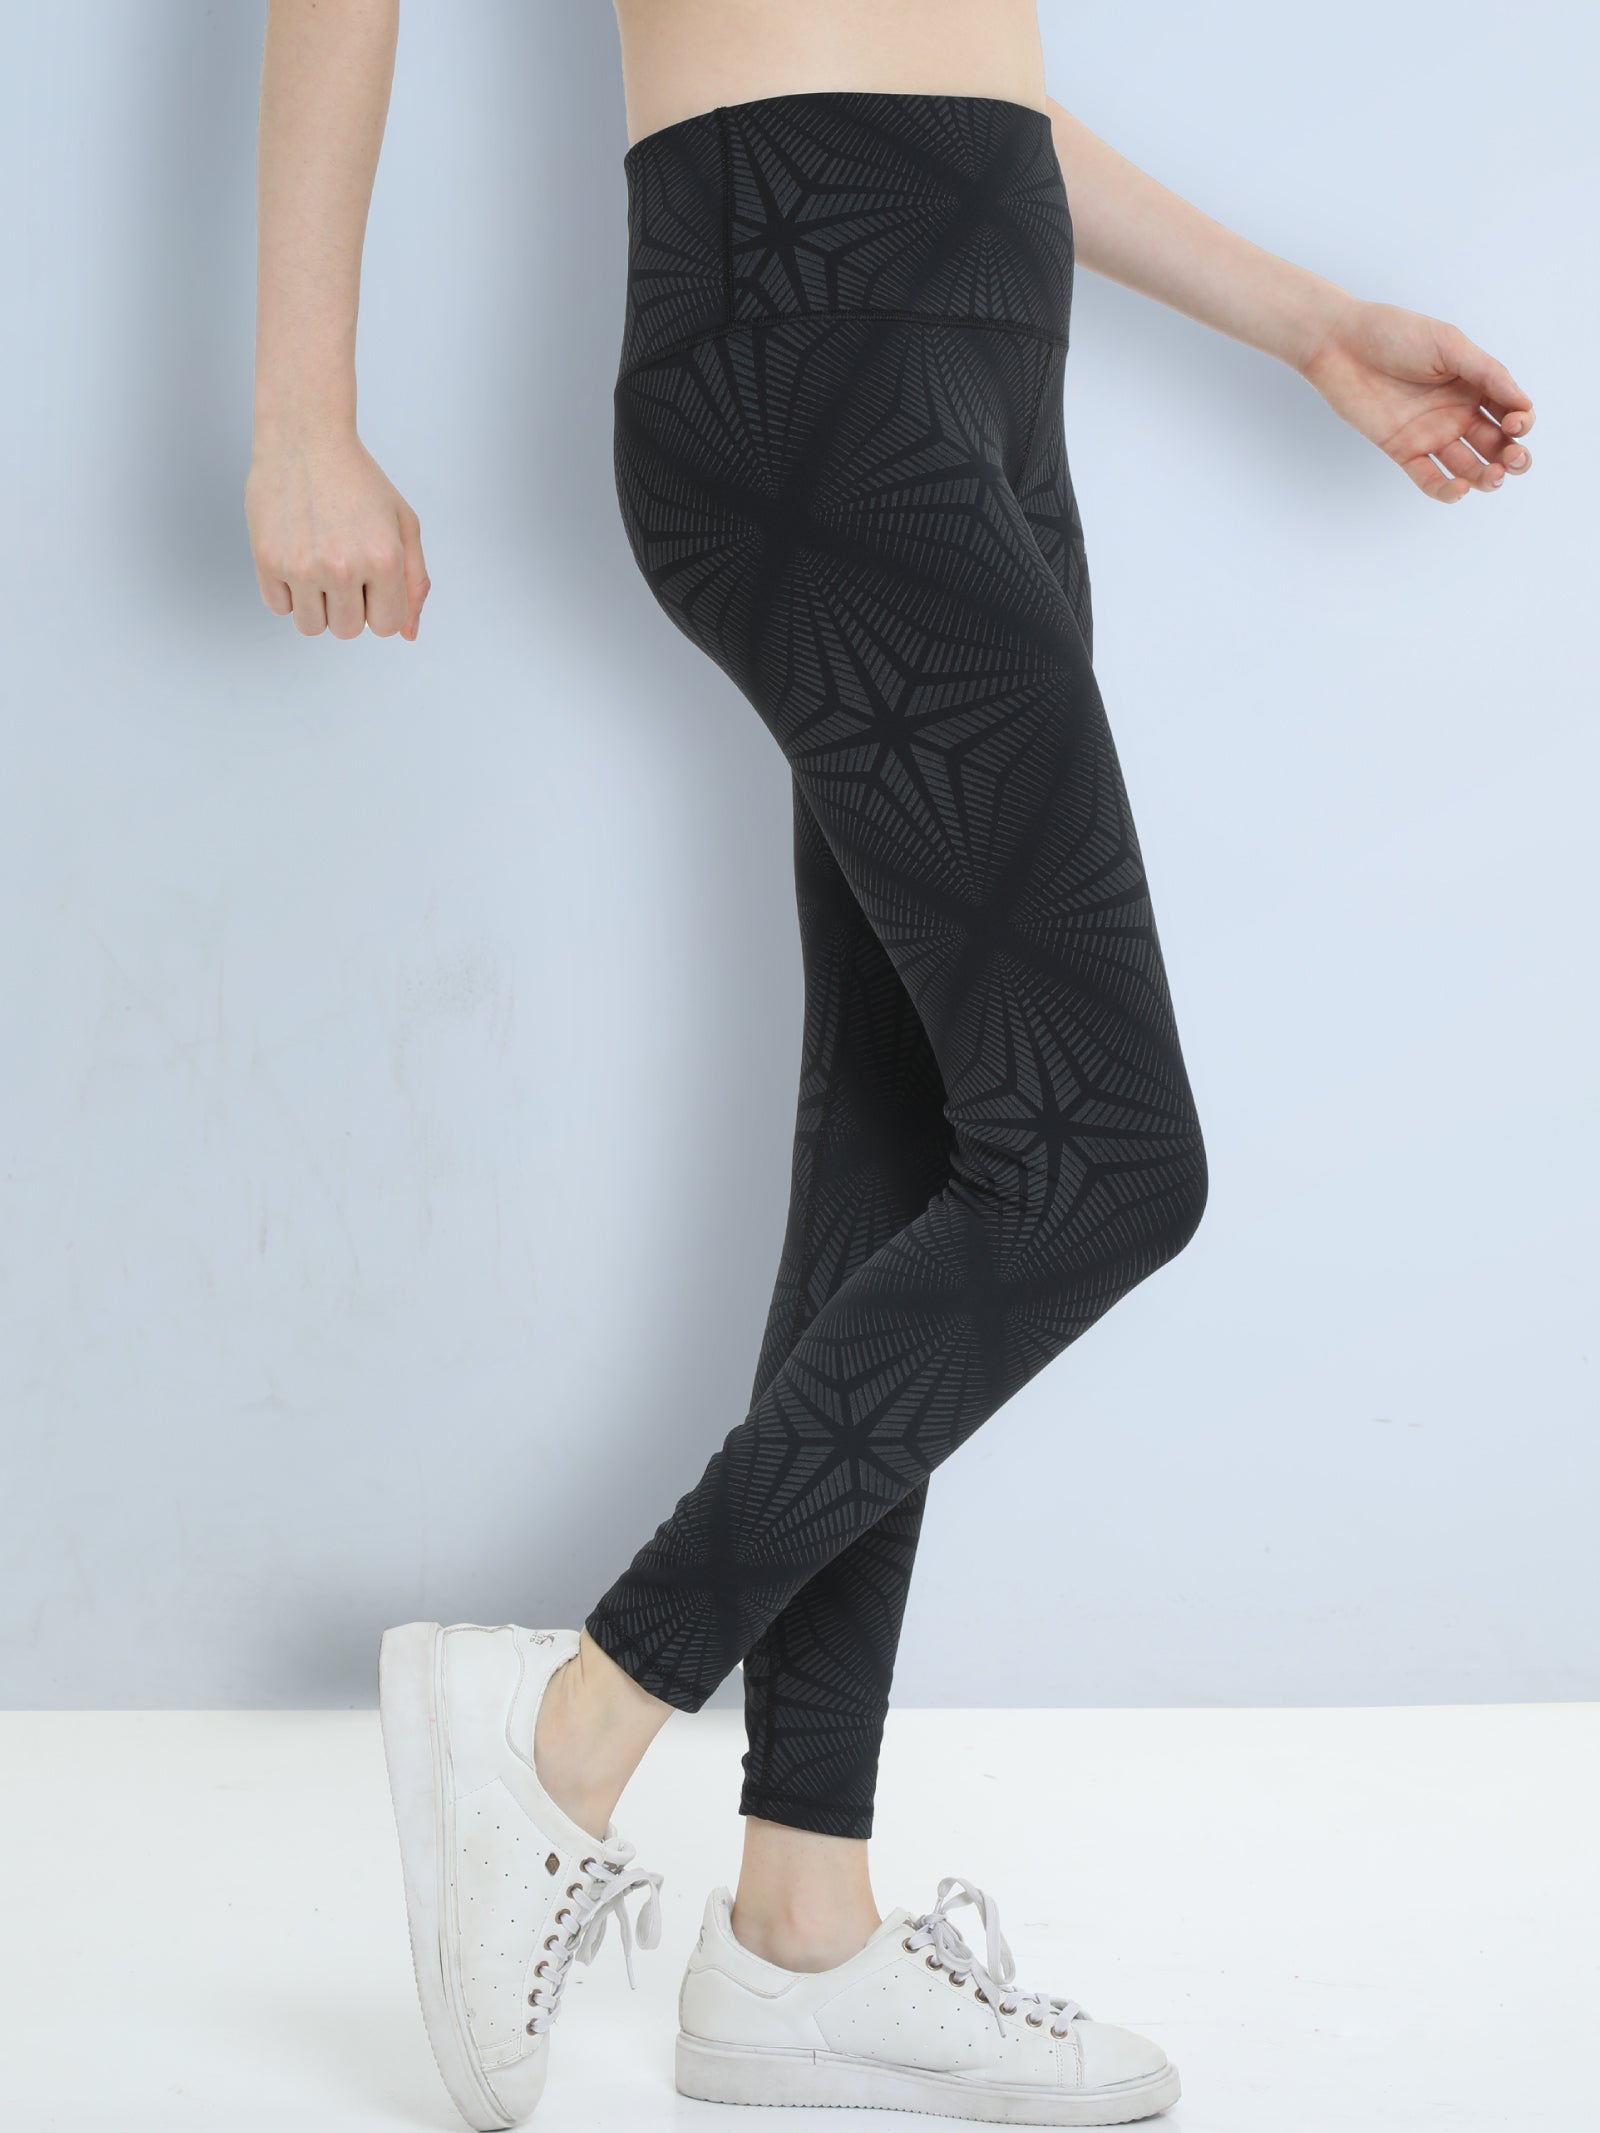 Buy POOJARAN SAREE Workout Tight/Pants/Legging with Side Pocket, Stretchy  Tights and a high Waist for Women and Girls' use in The Gym,Yoga,Running,Cycling  Online at Best Prices in India - JioMart.